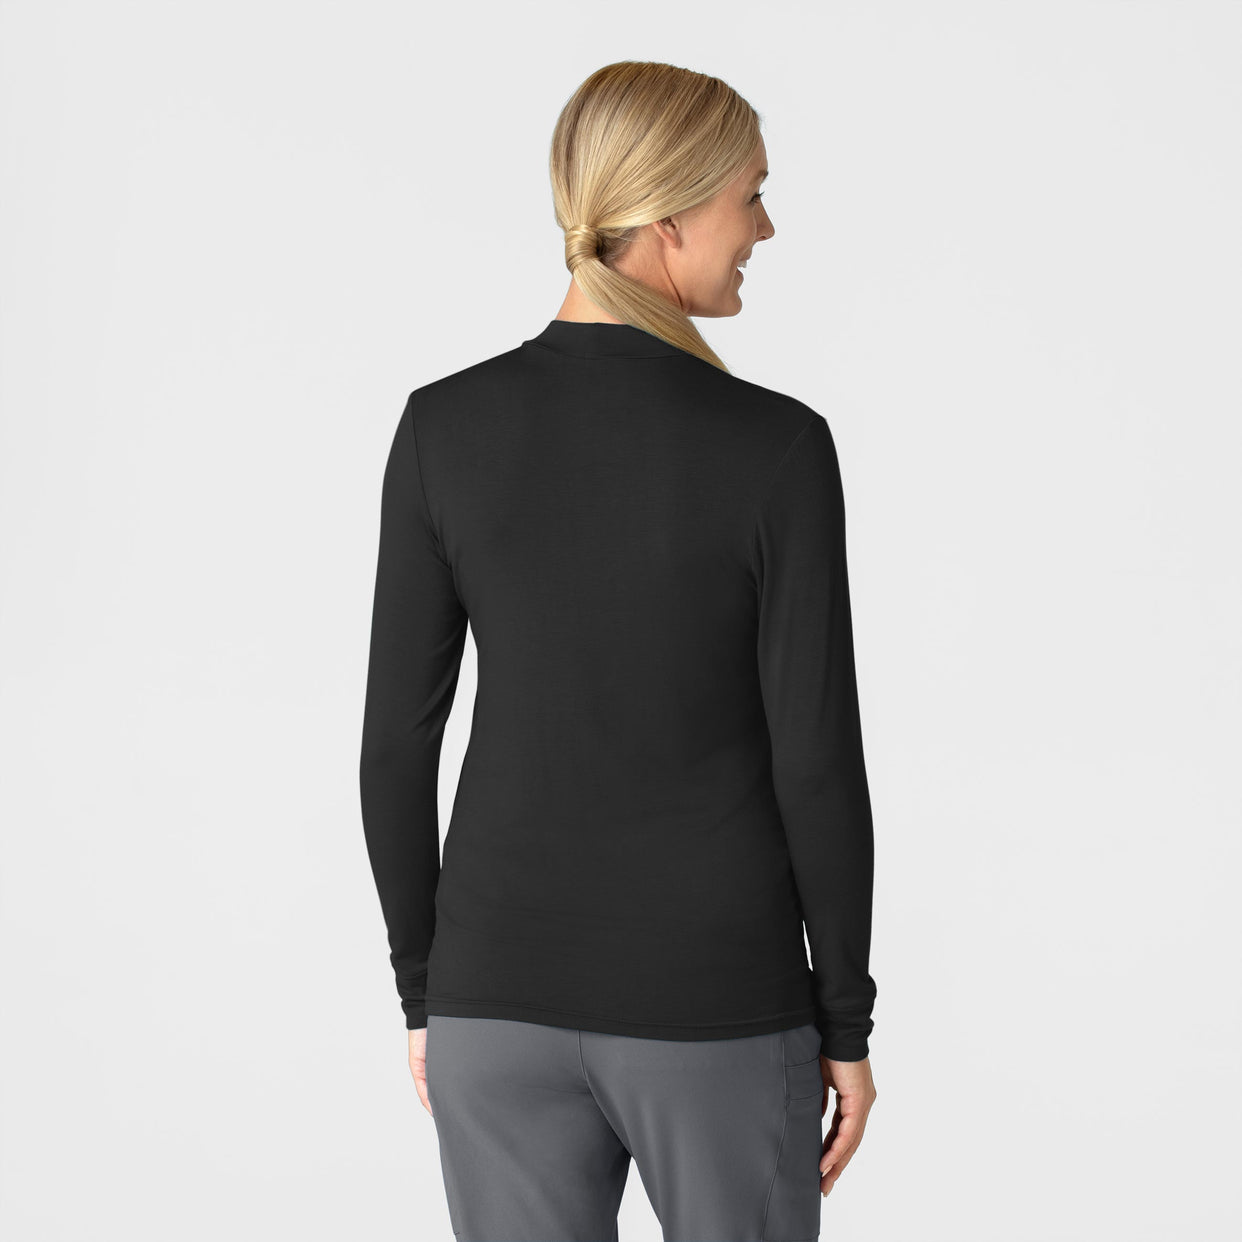 Knits and Layers Women’s Long Sleeve Mock Neck Silky Tee Black back view